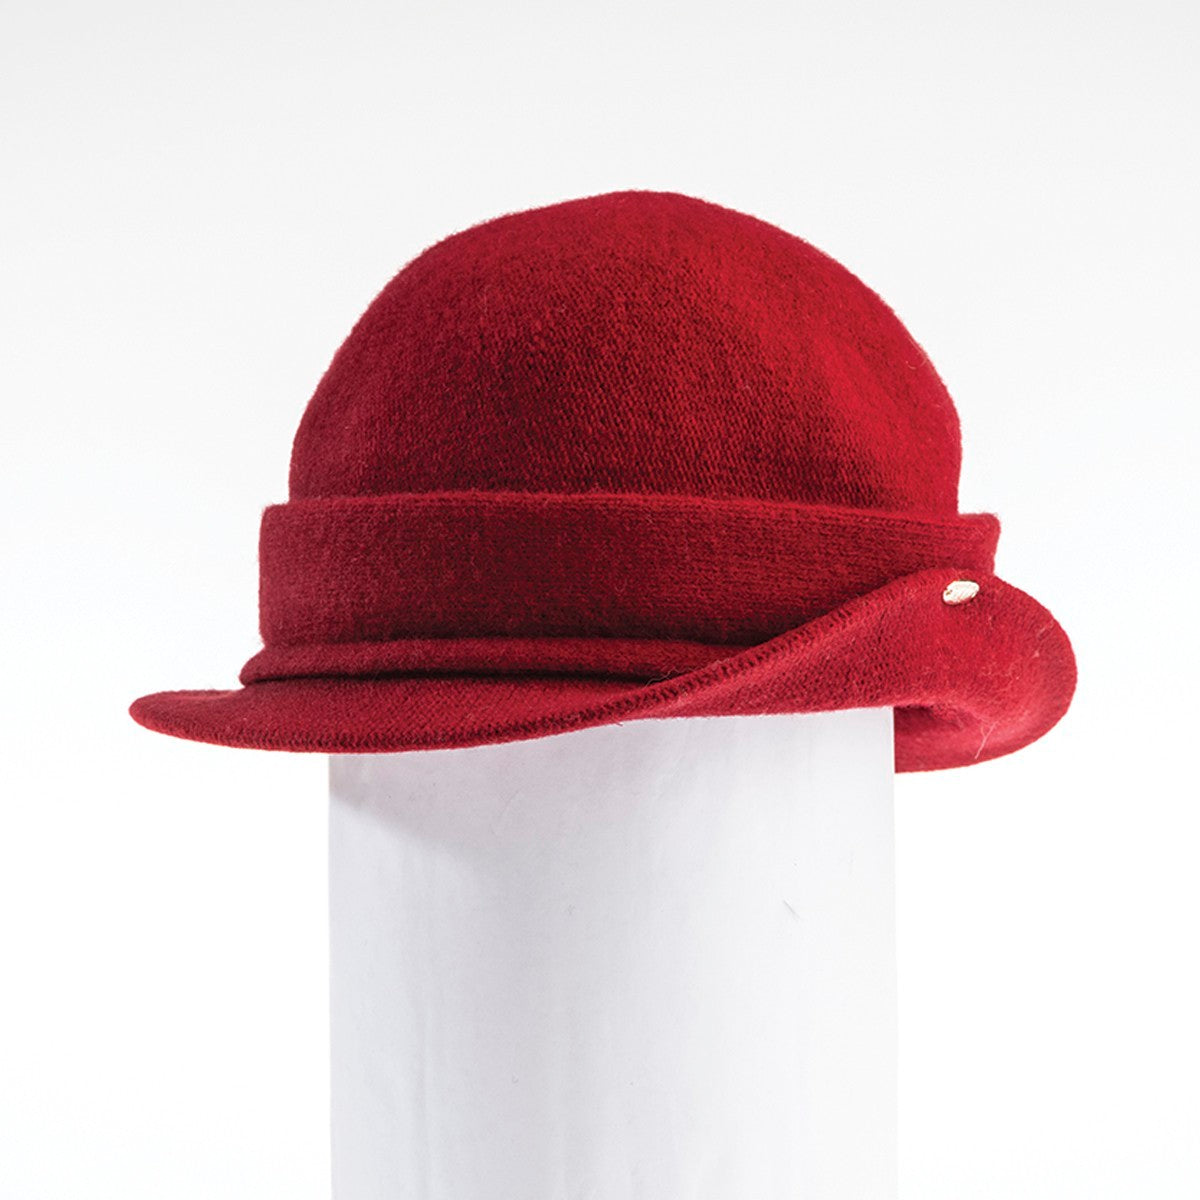 OKENA - ORMOS CLOCHE HAT WITH SIDE RISE GOLF  5800 RED O/S  